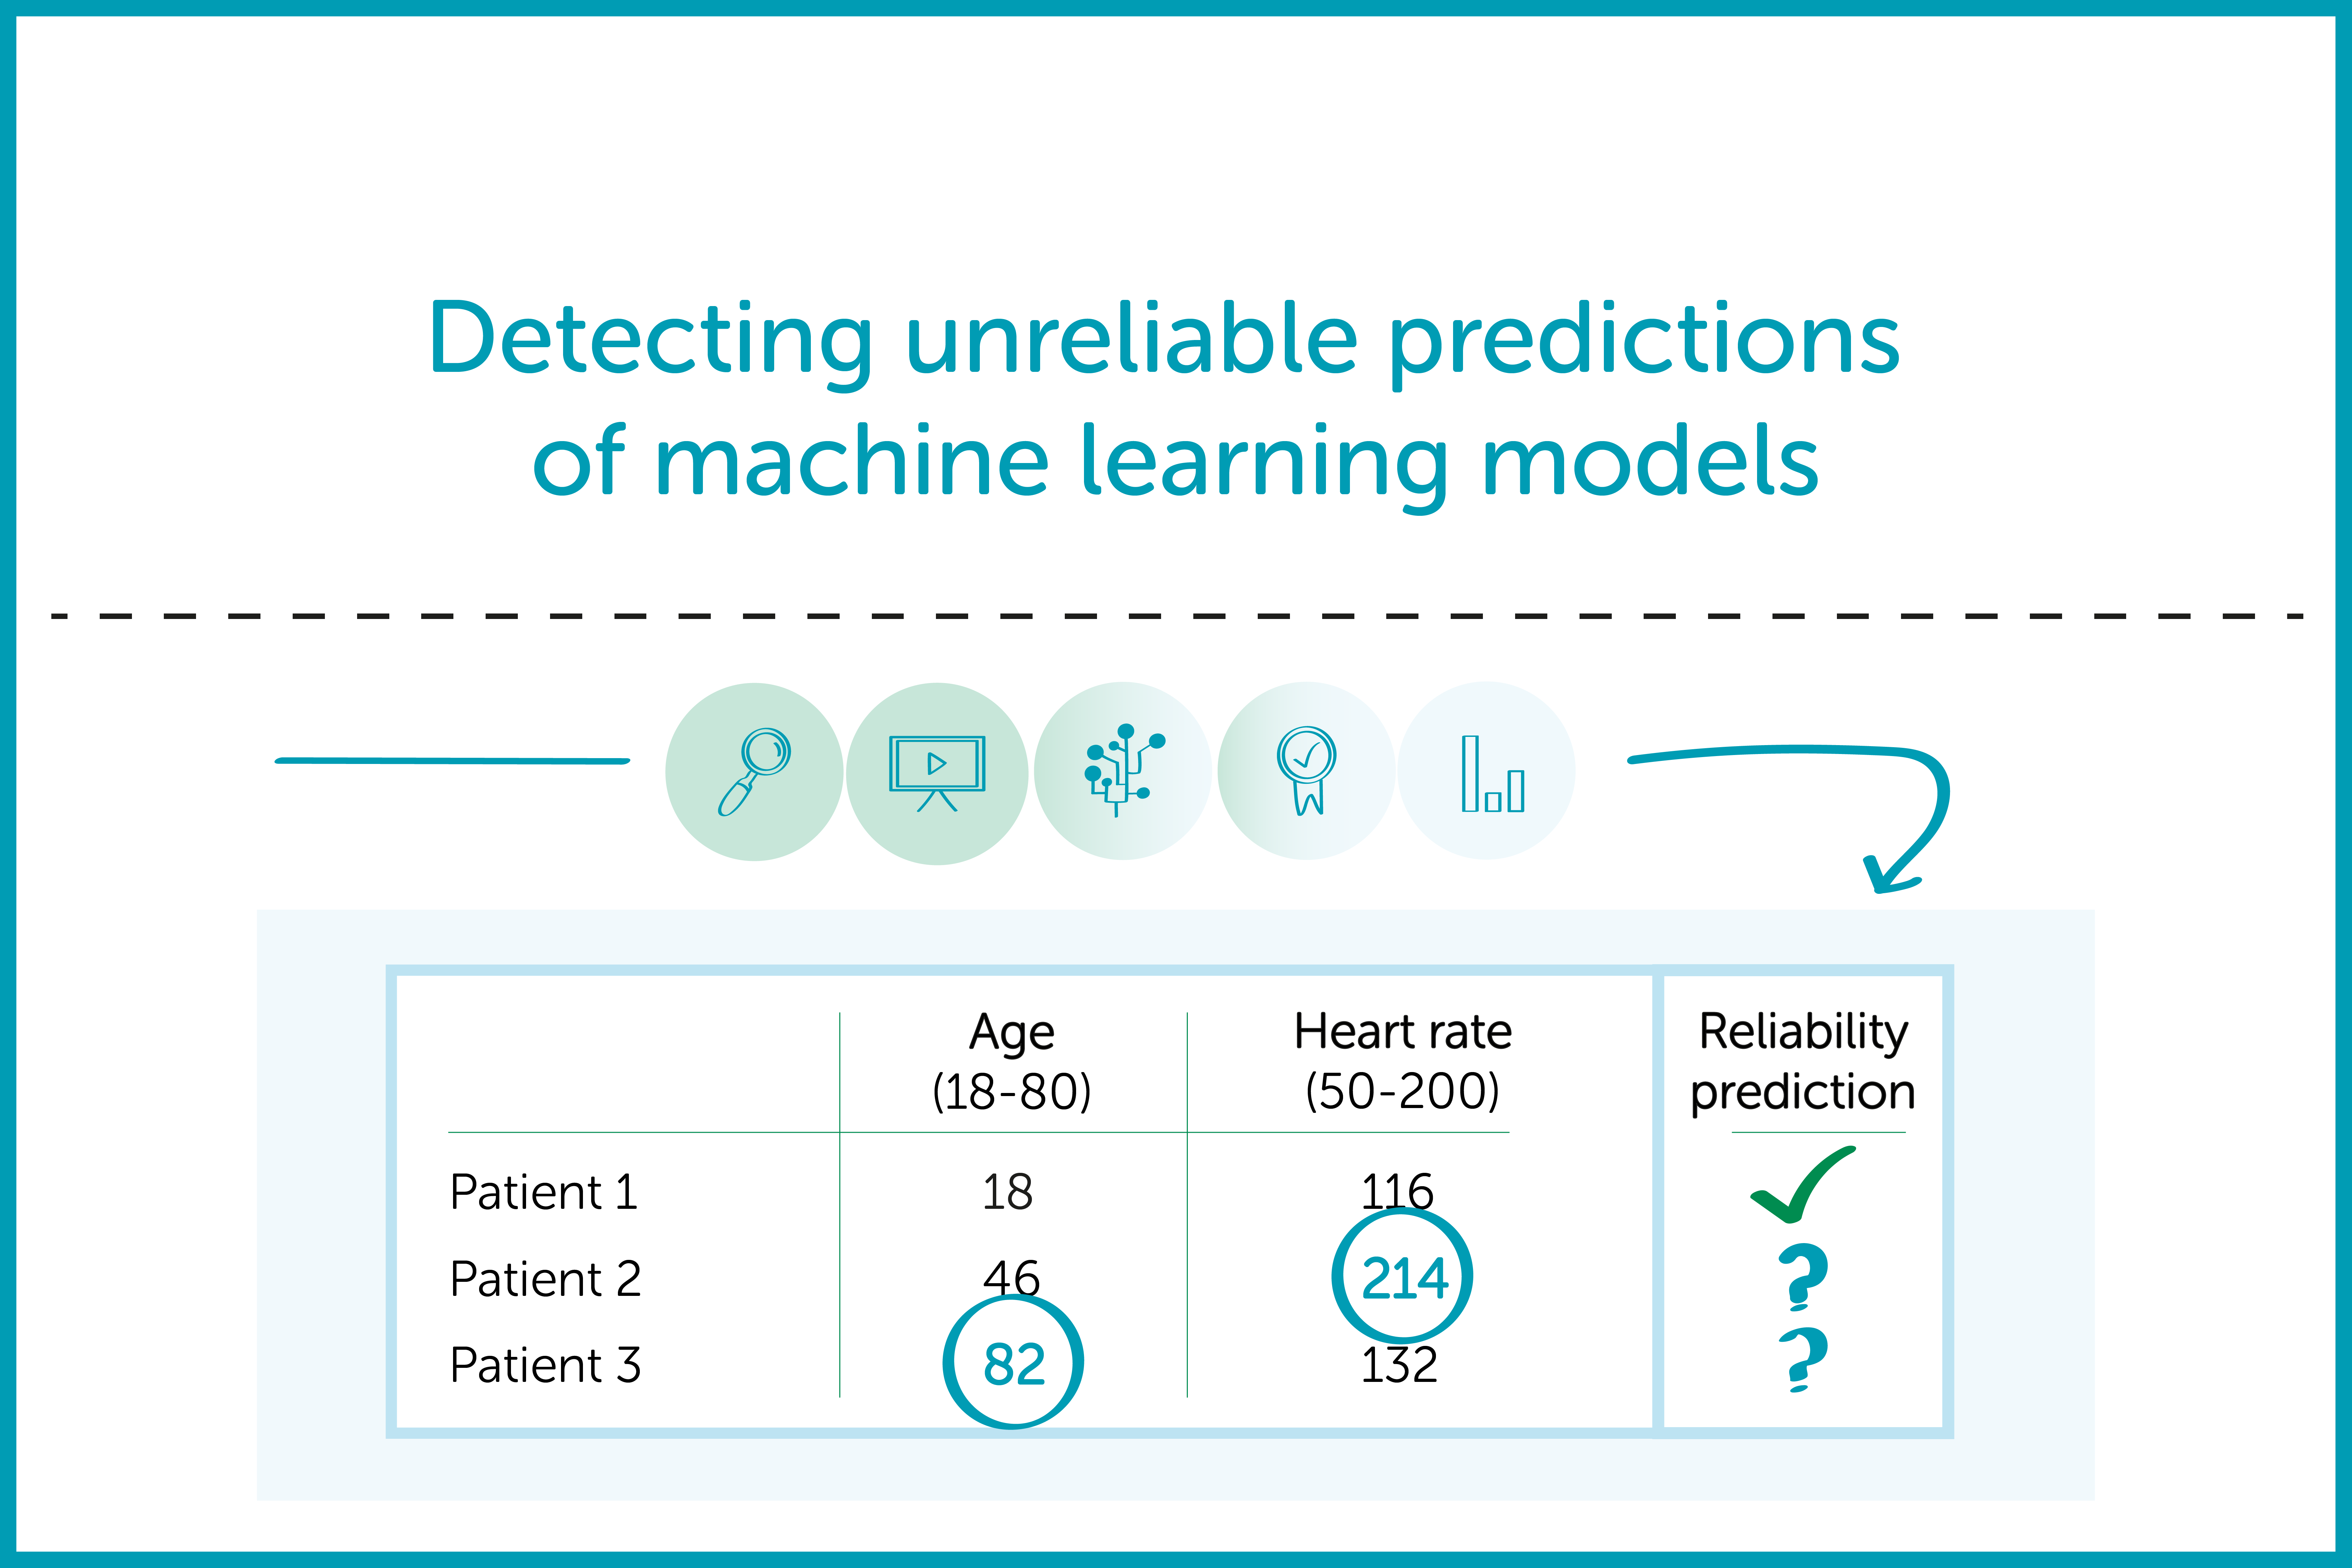 Detecting unreliable predictions of machine learning models